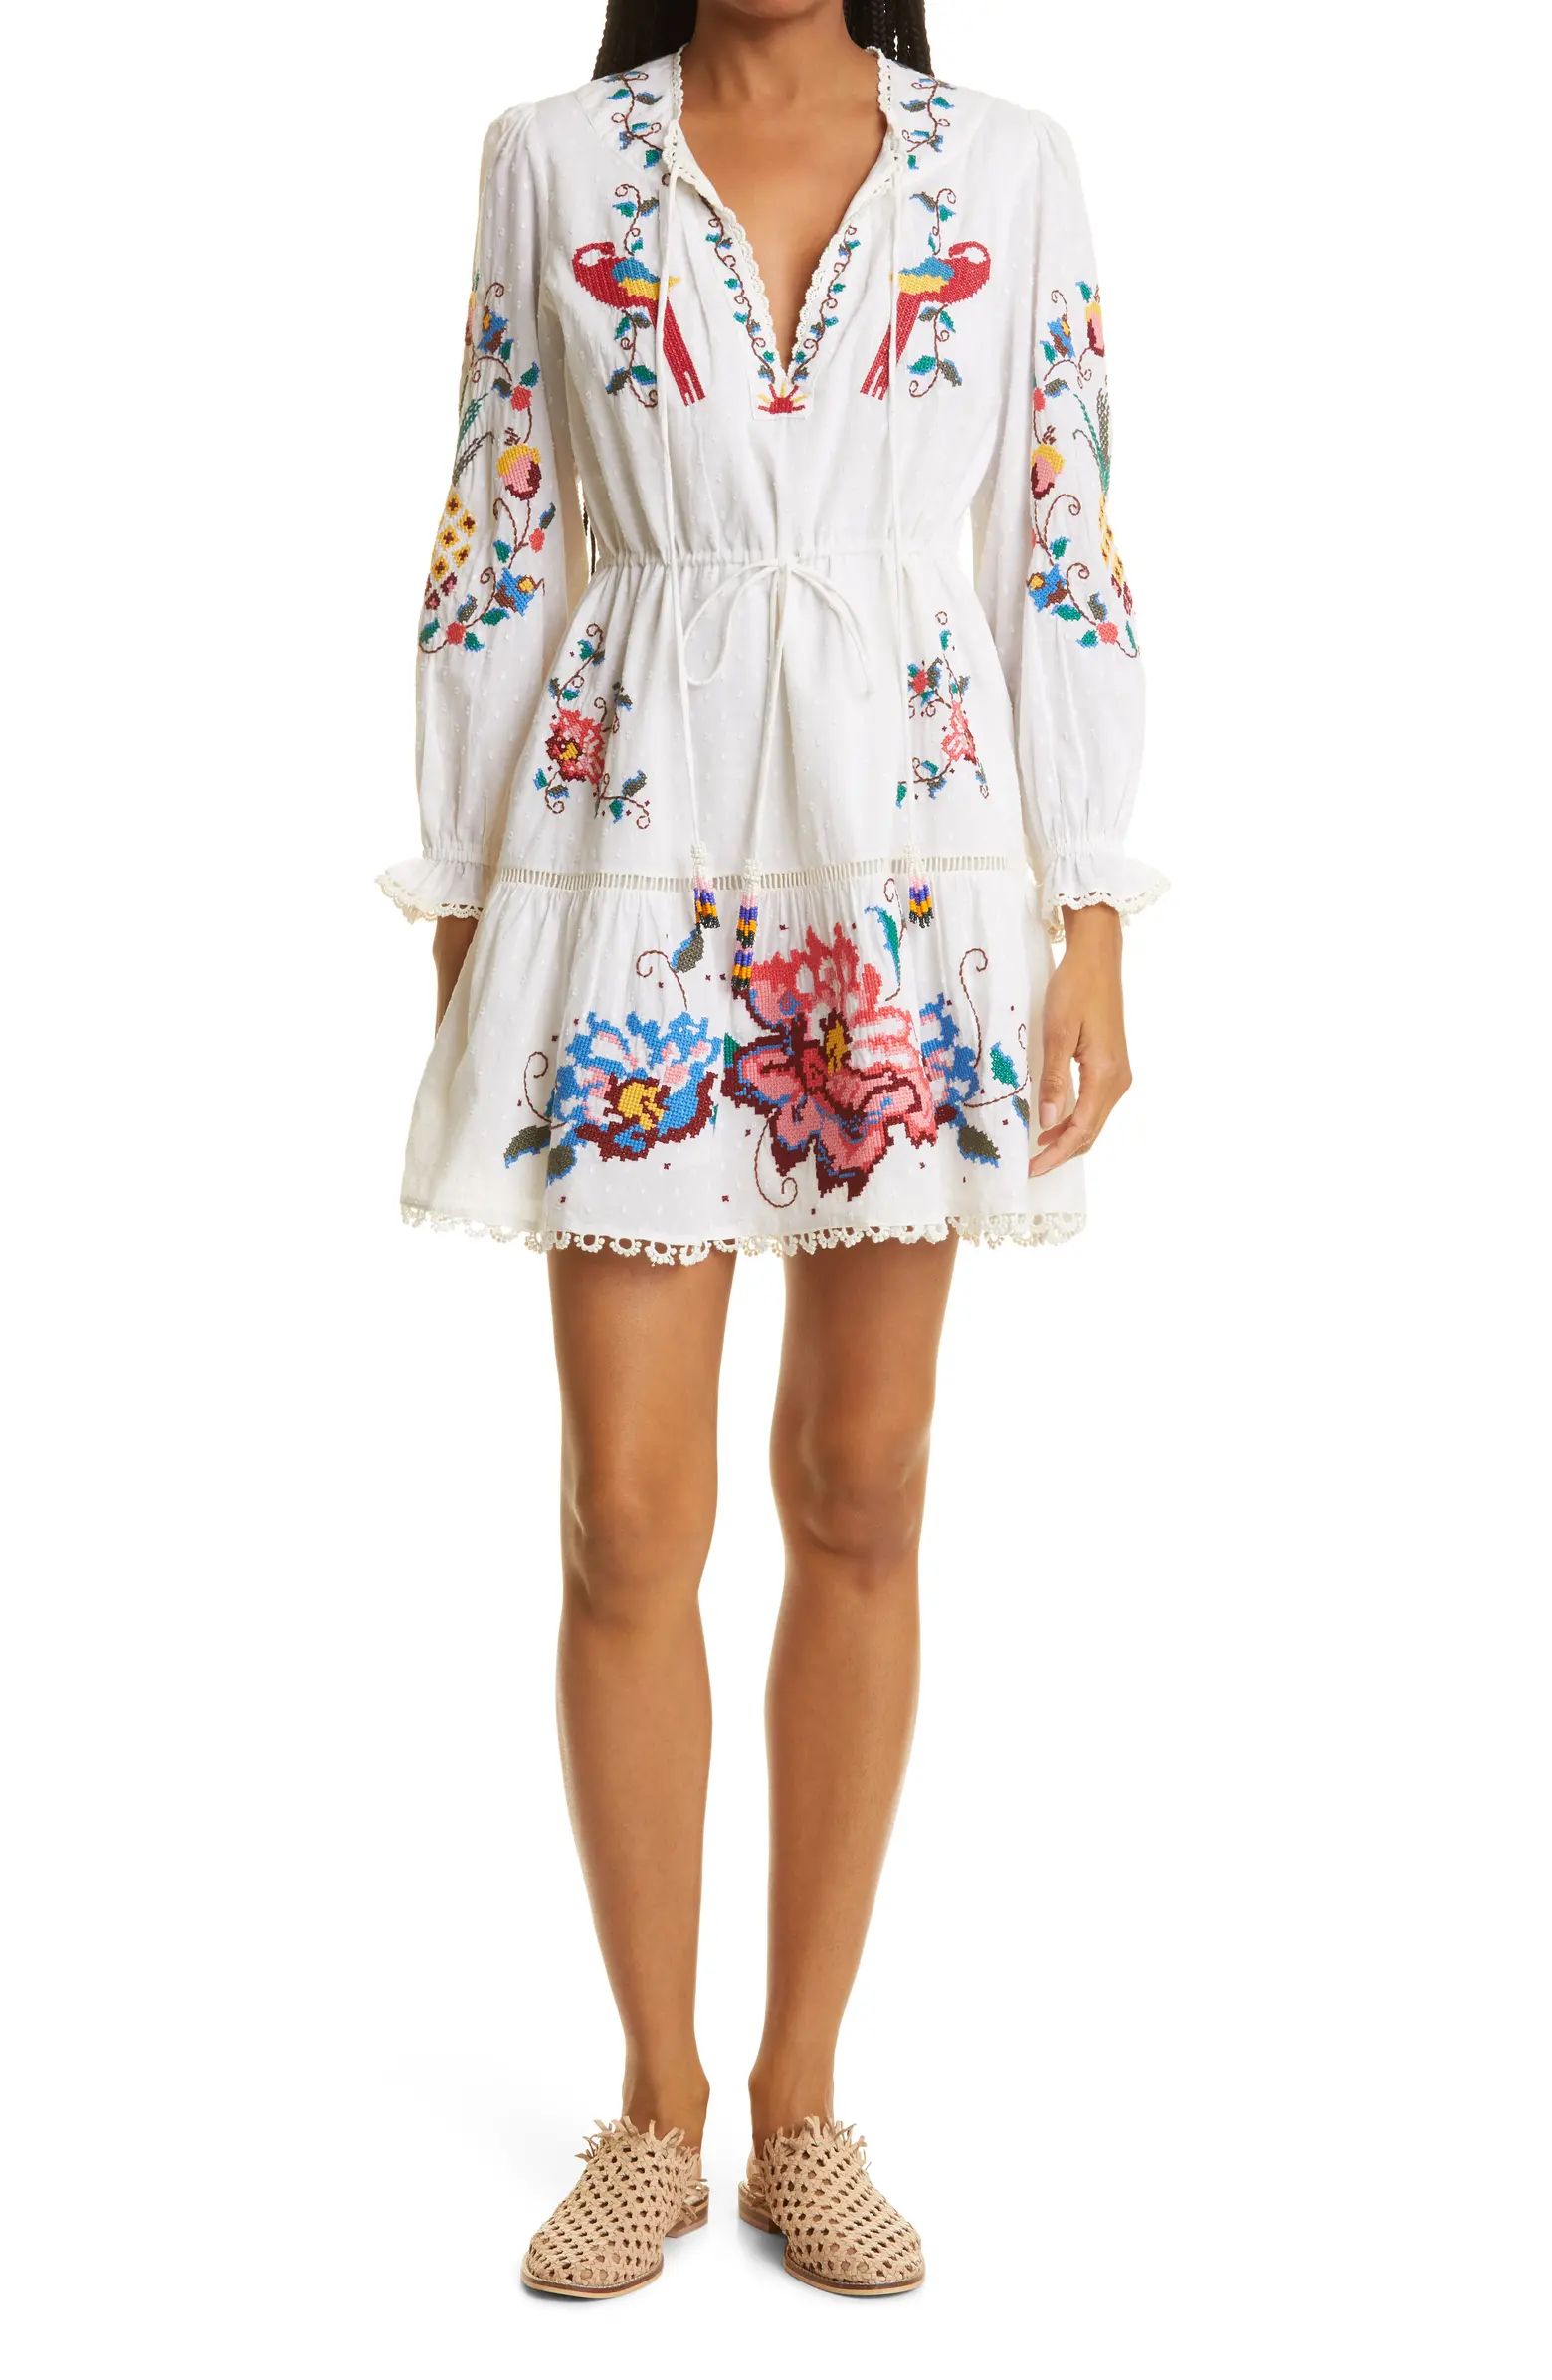 FARM Rio Macaw Long Sleeve Cross Stitch Embroidered Dress | Nordstrom | Nordstrom